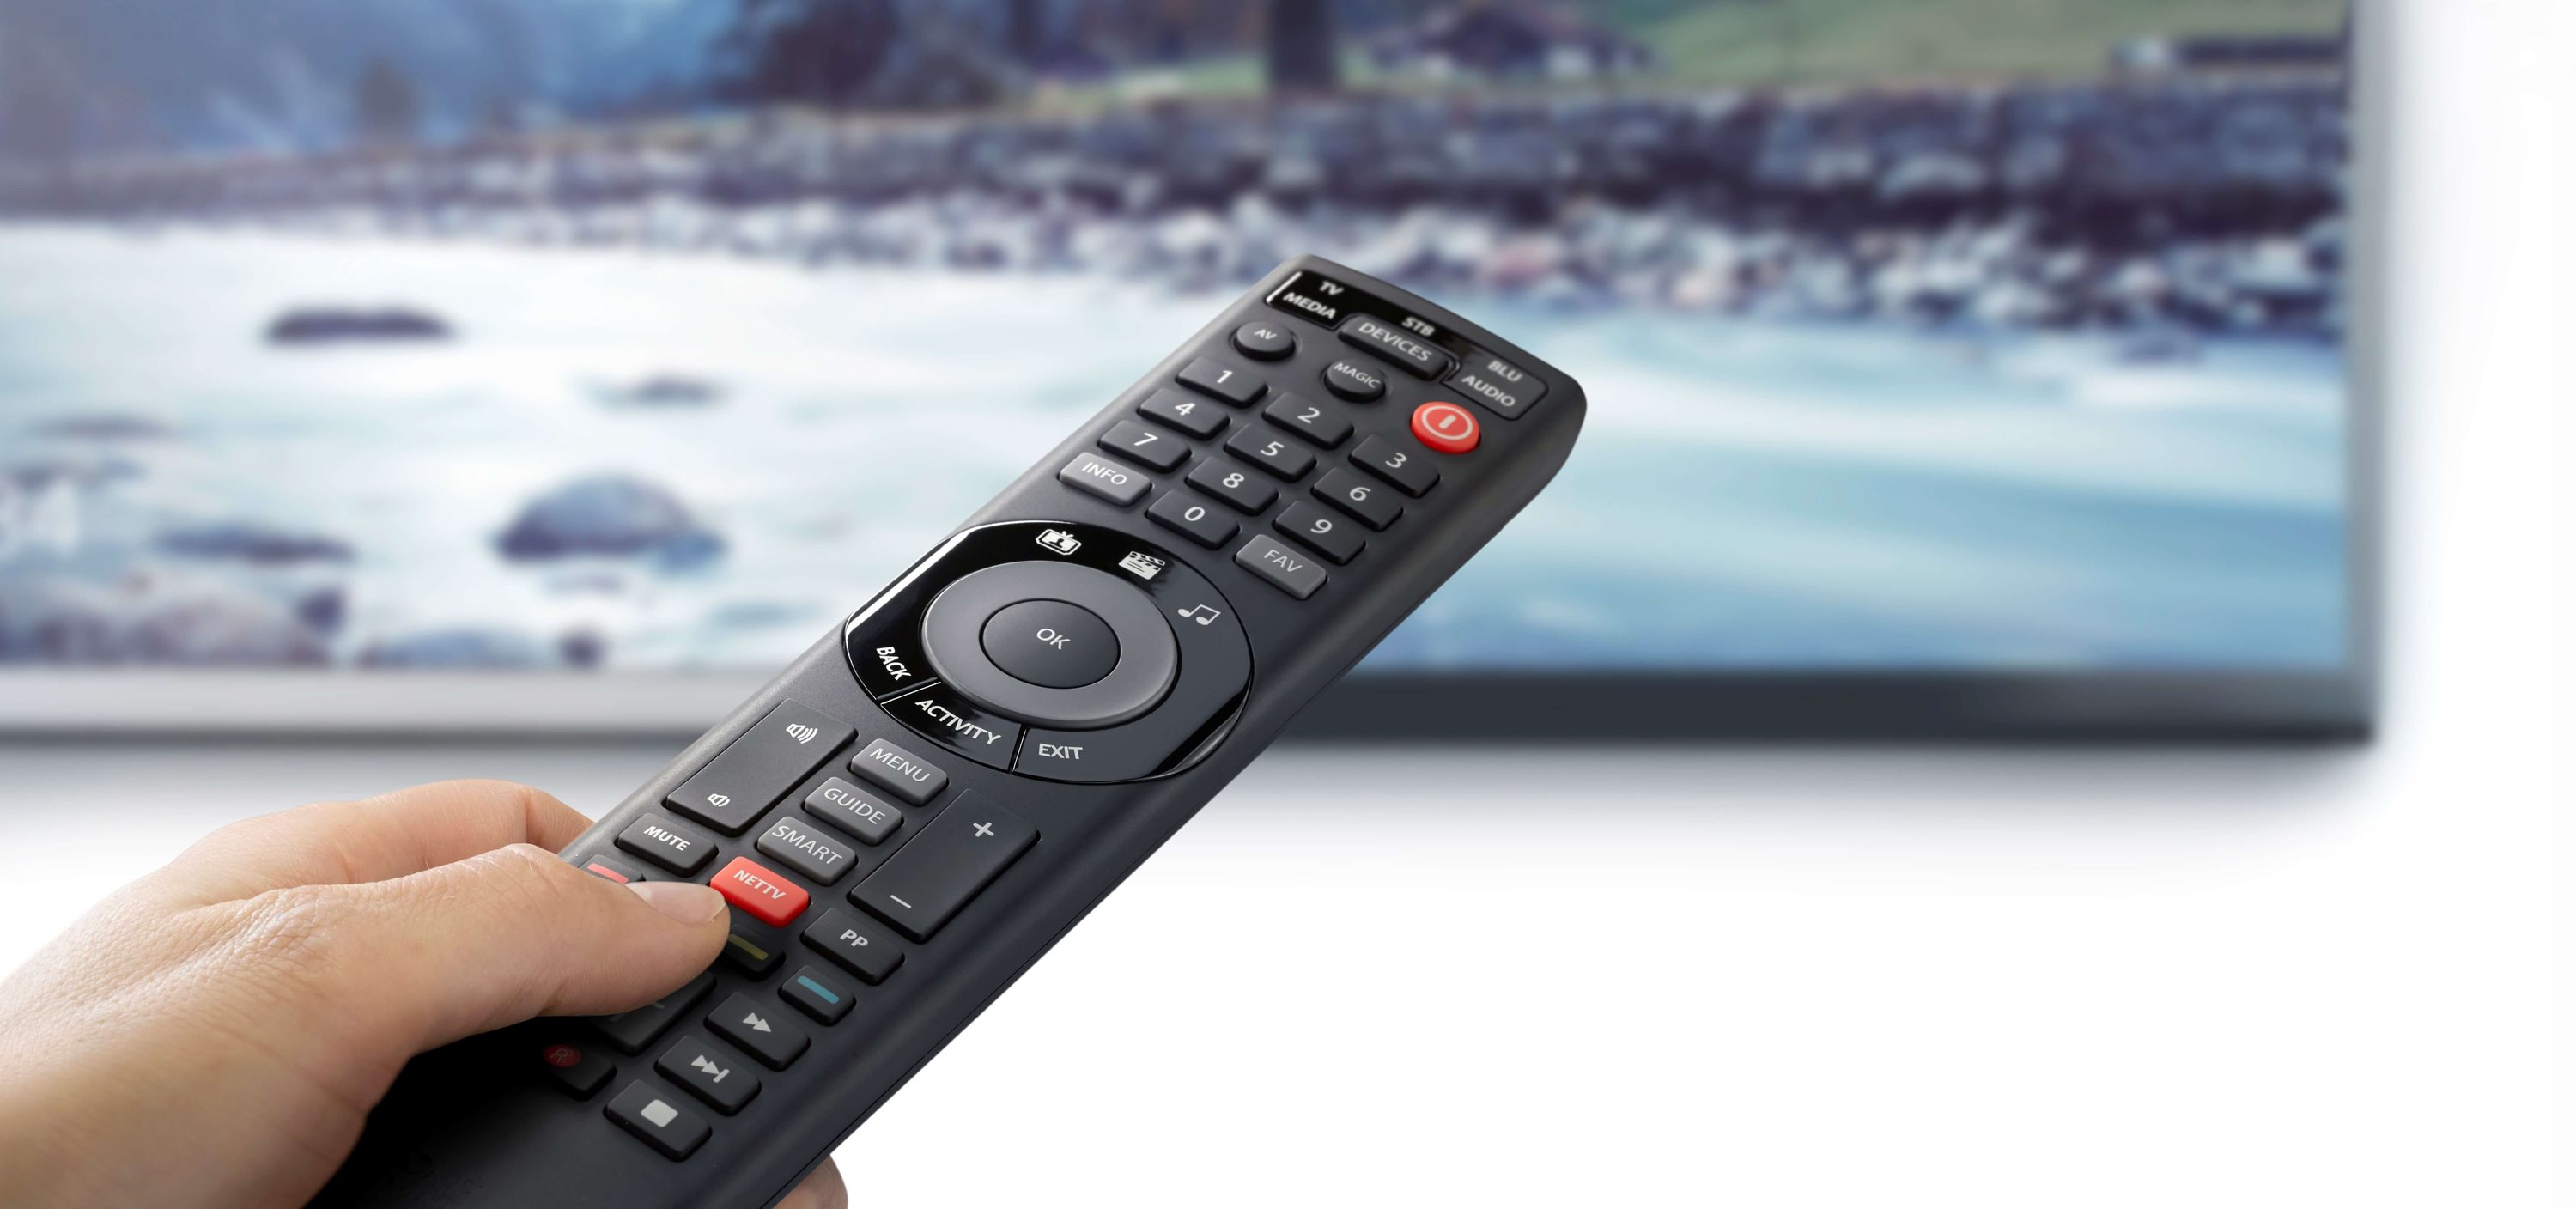 What is a Magic Remote v5 